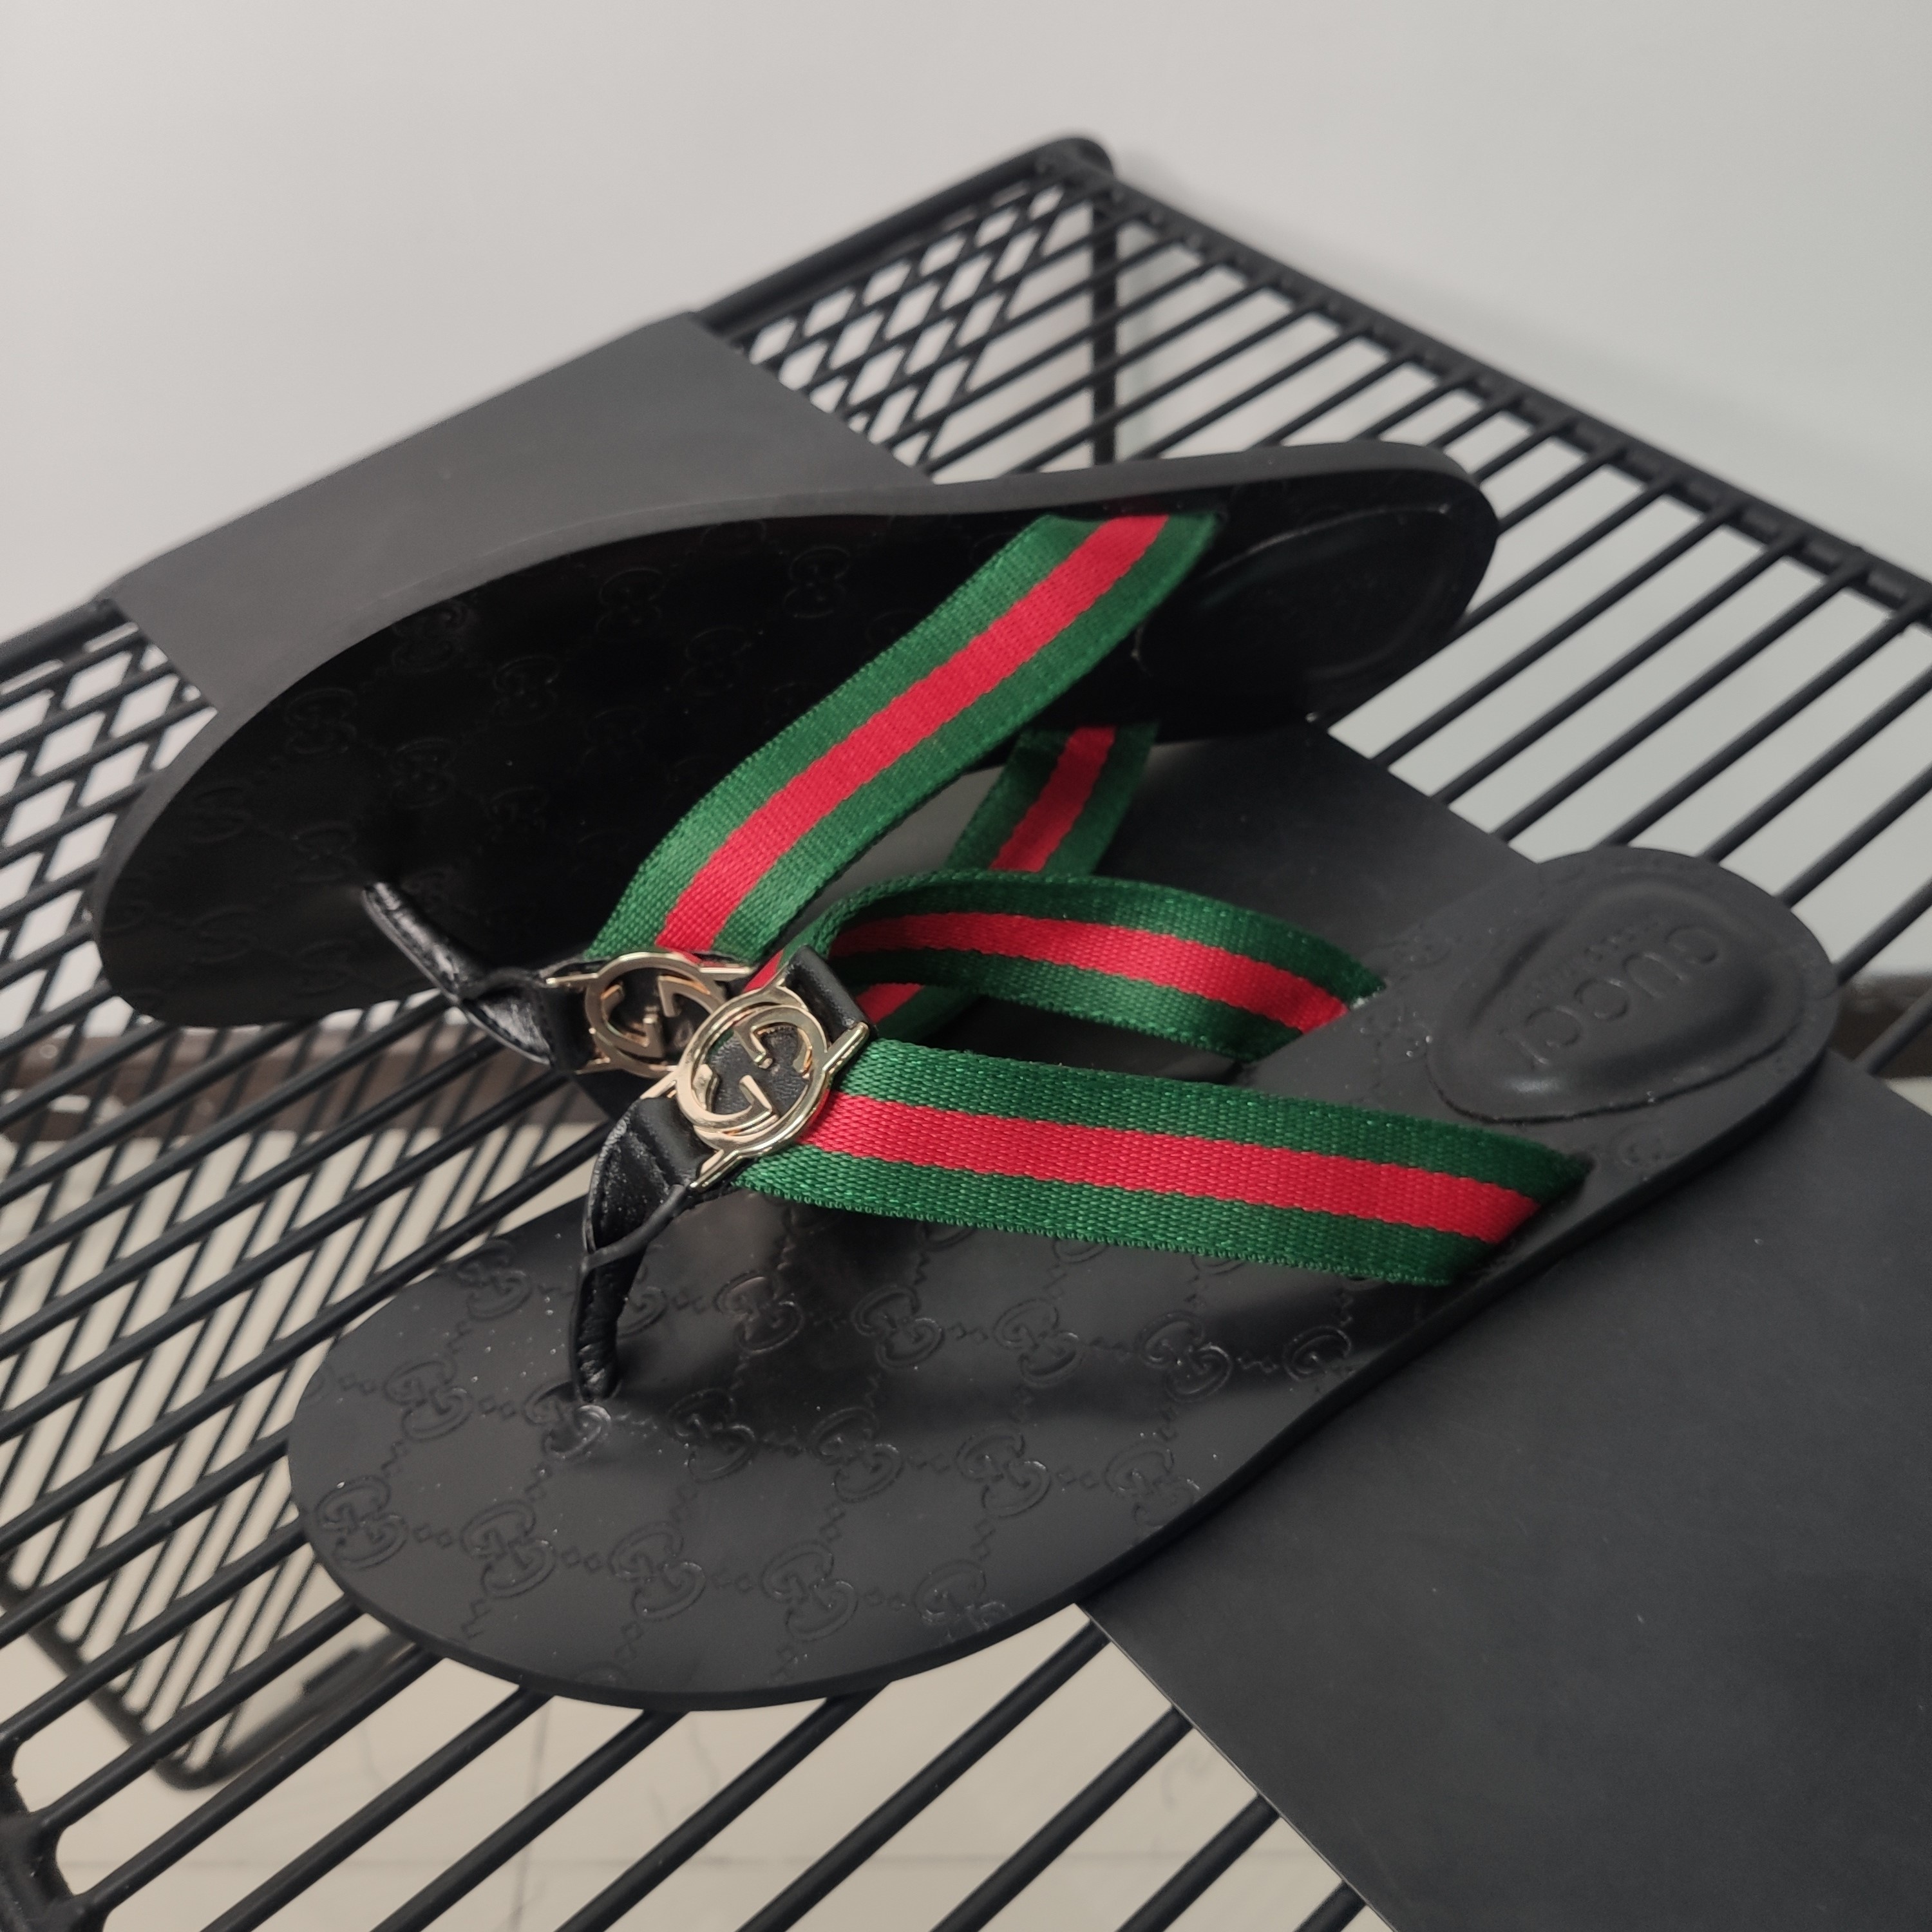 High Quality Gucci Web strap thong sandal Green and red Web nylon strap with black leather detail OF_DC210557A449